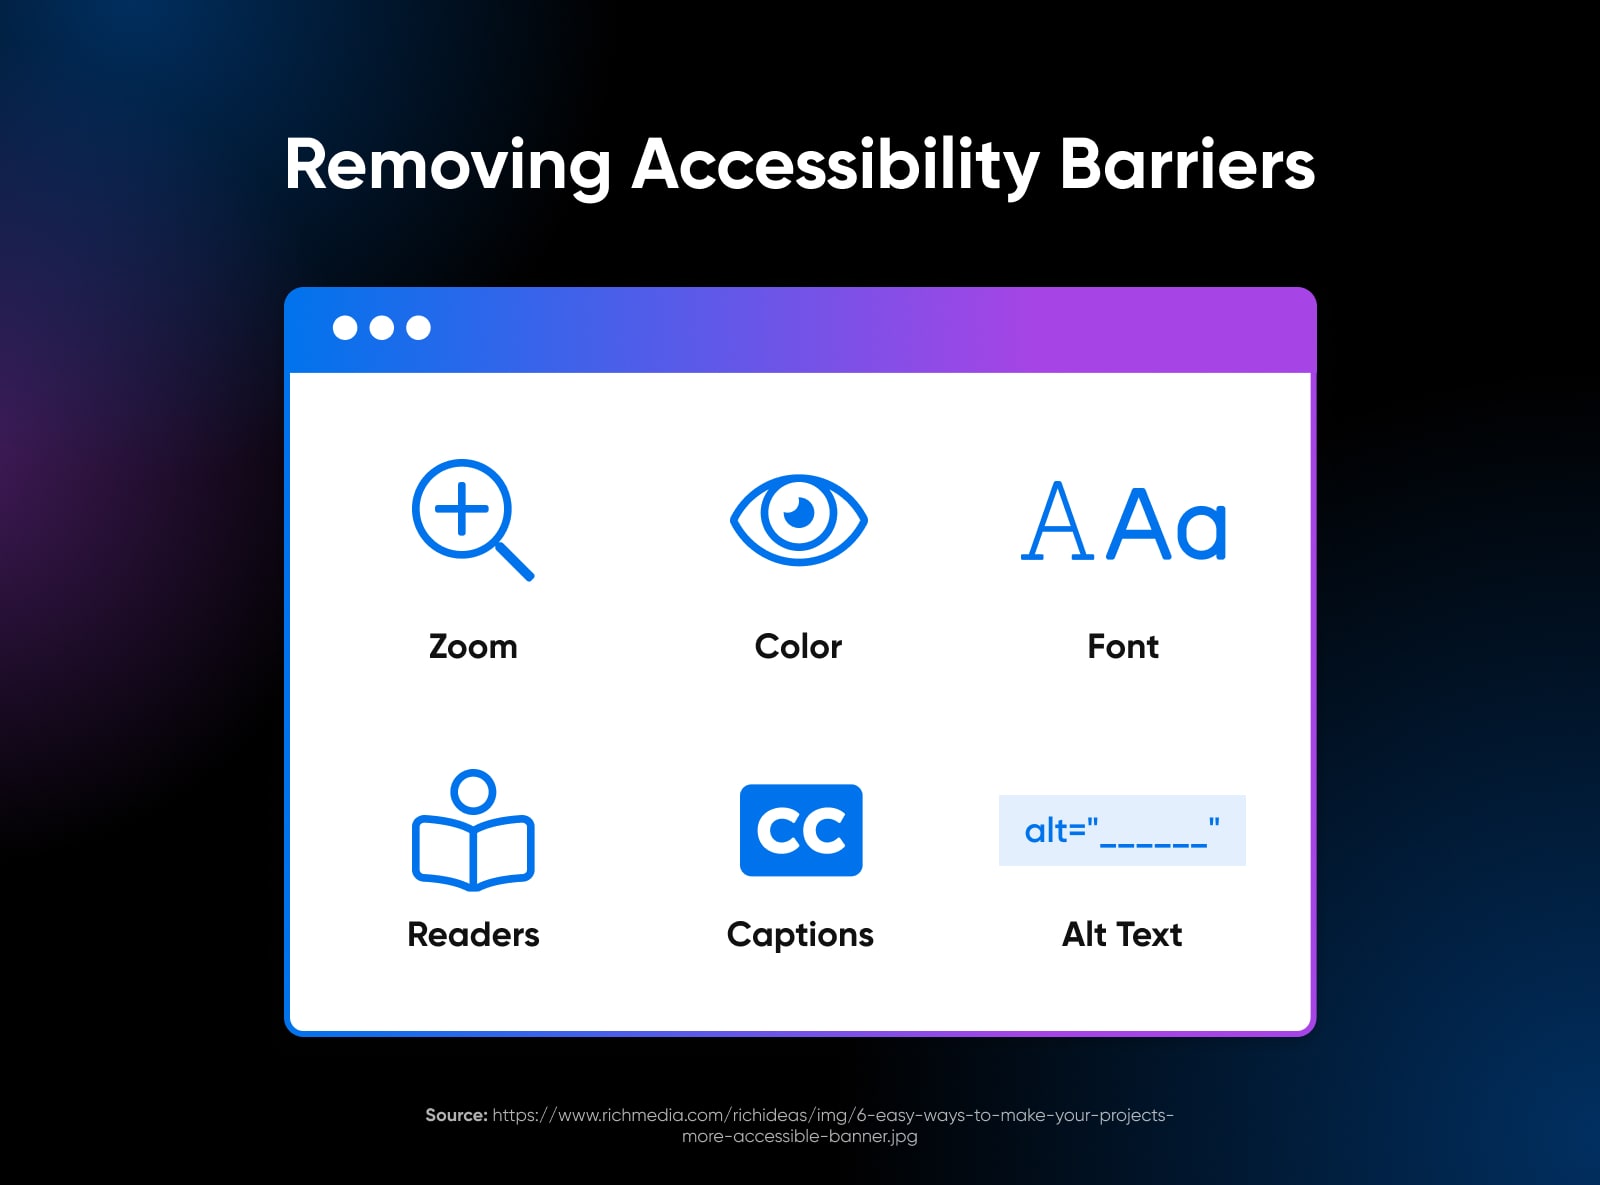 Removing accessibility barriers using: zoom, color, font, readers, captions, and alt text 